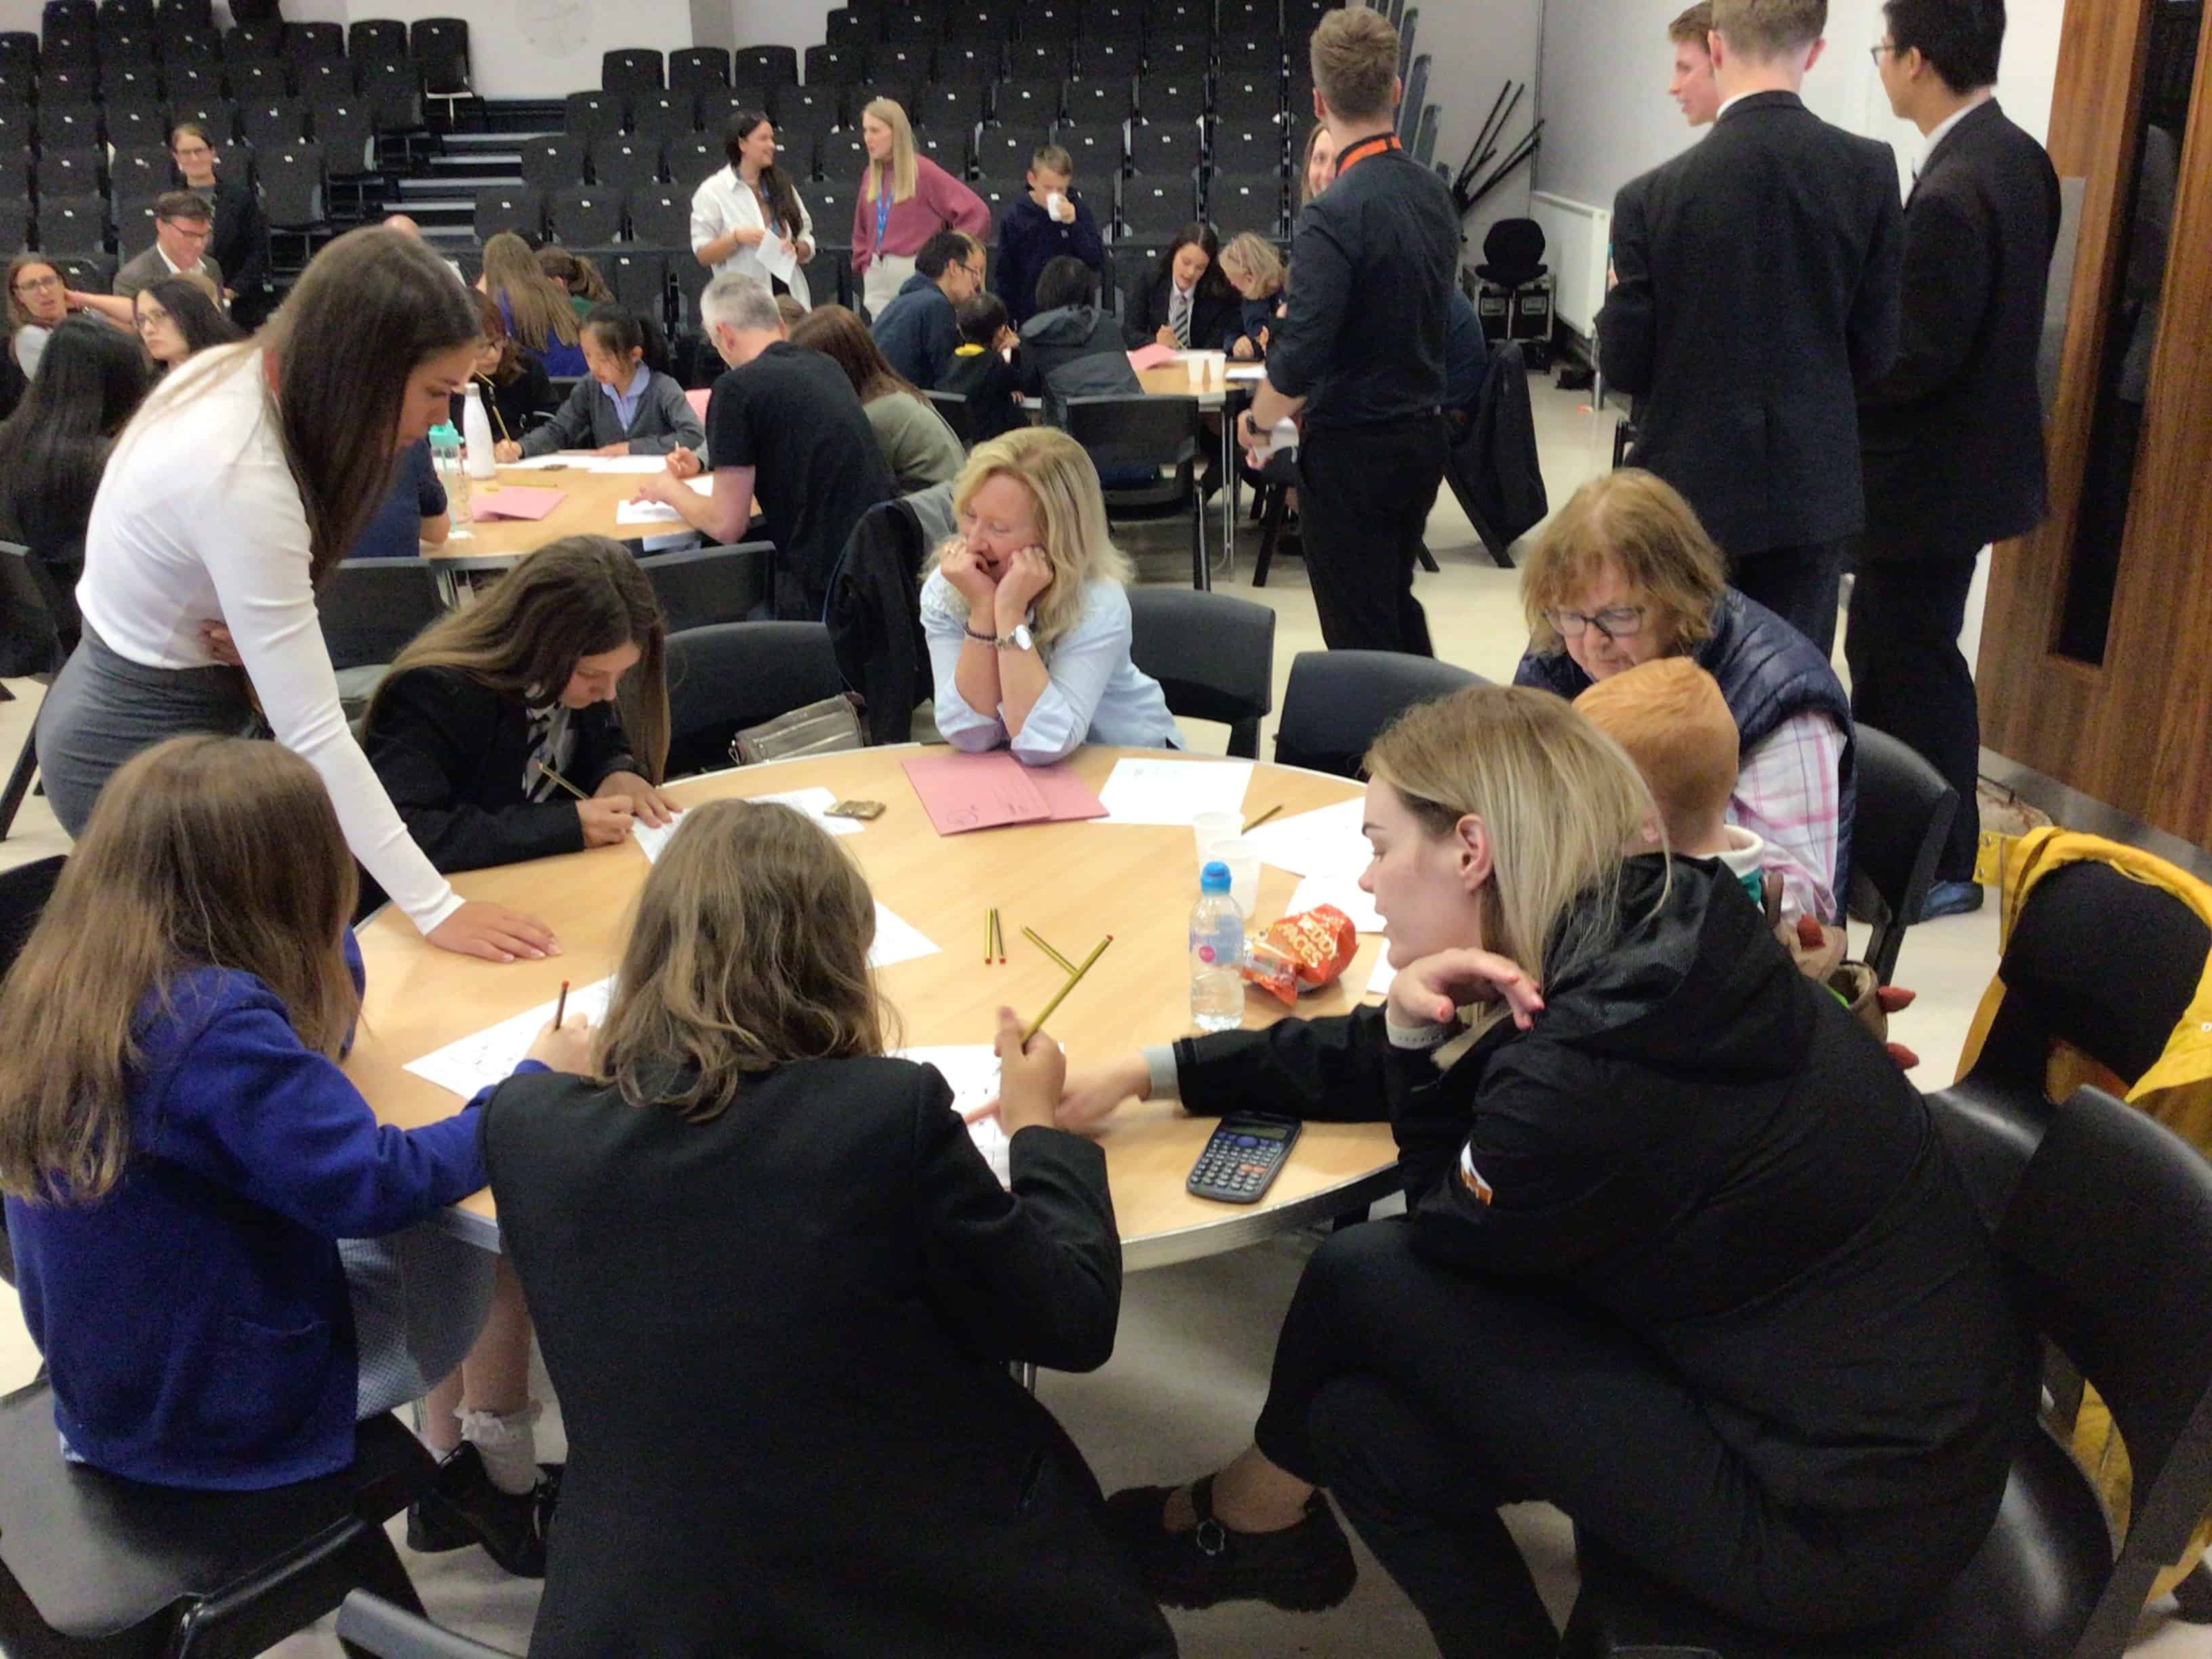 Pupils, parents and teachers working together to solve maths problems at Cheadle Hulme High School Maths Awards evening